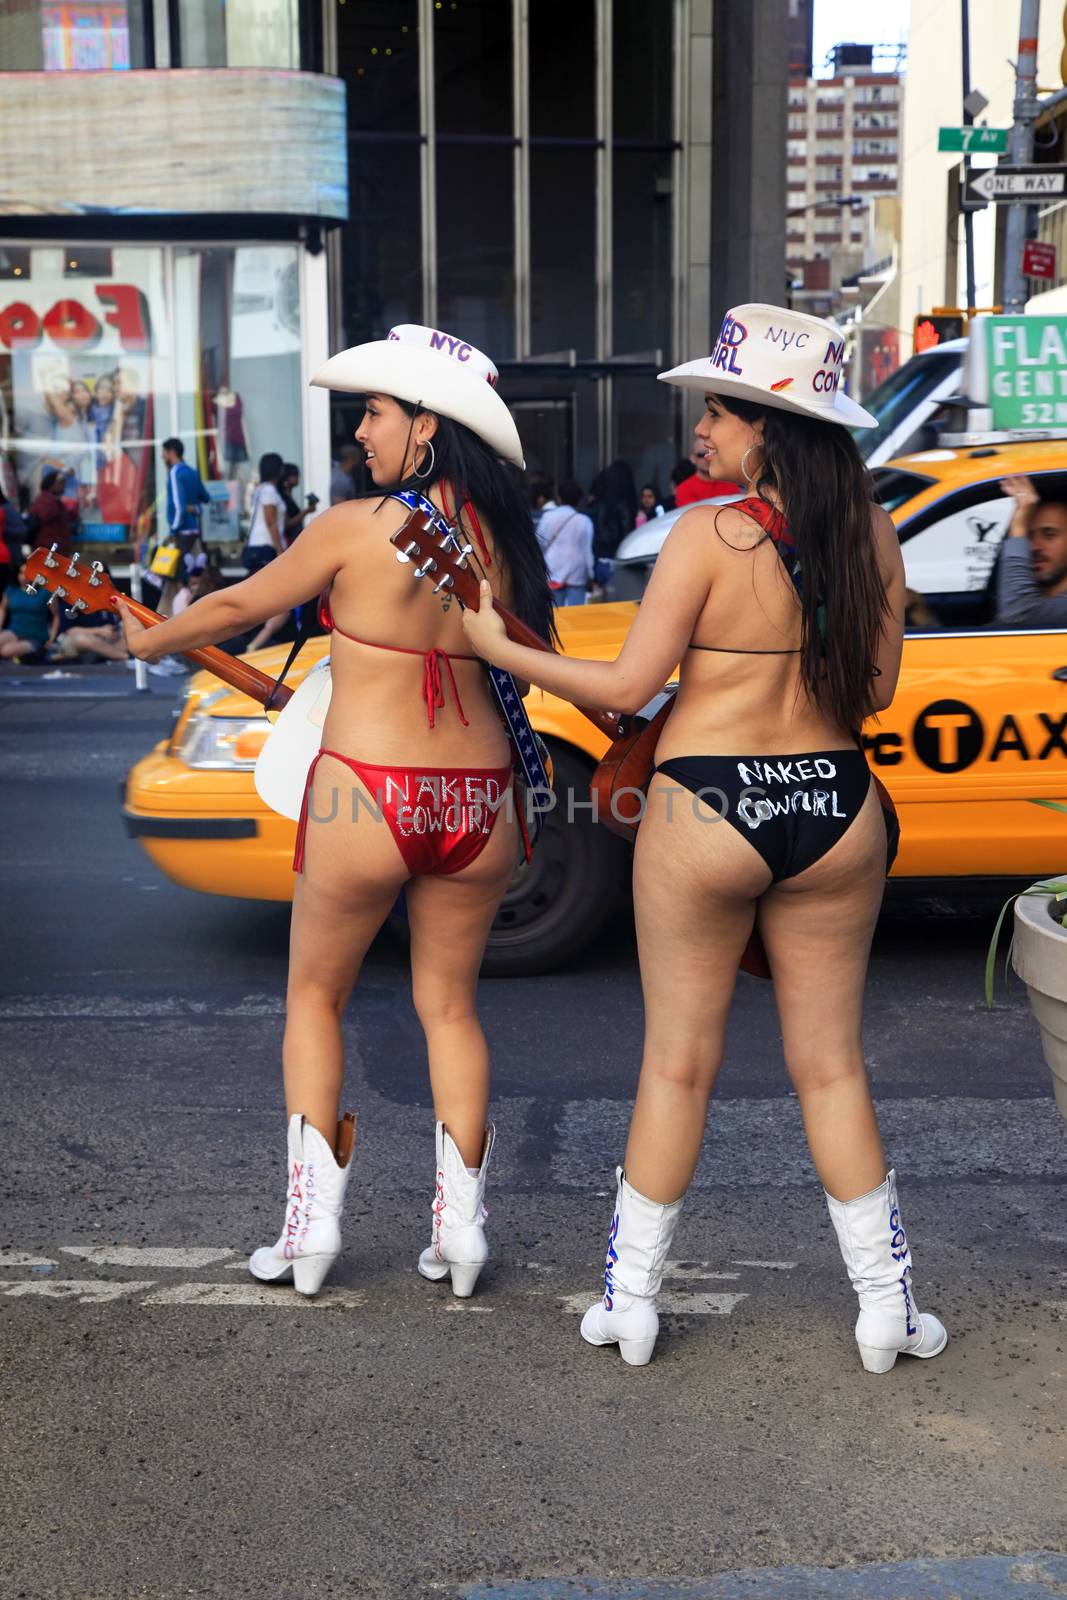 New York City, USA - May 17, 2013: New York City, two naked cowgirls in bikini play guitar on times square manhattan new york city